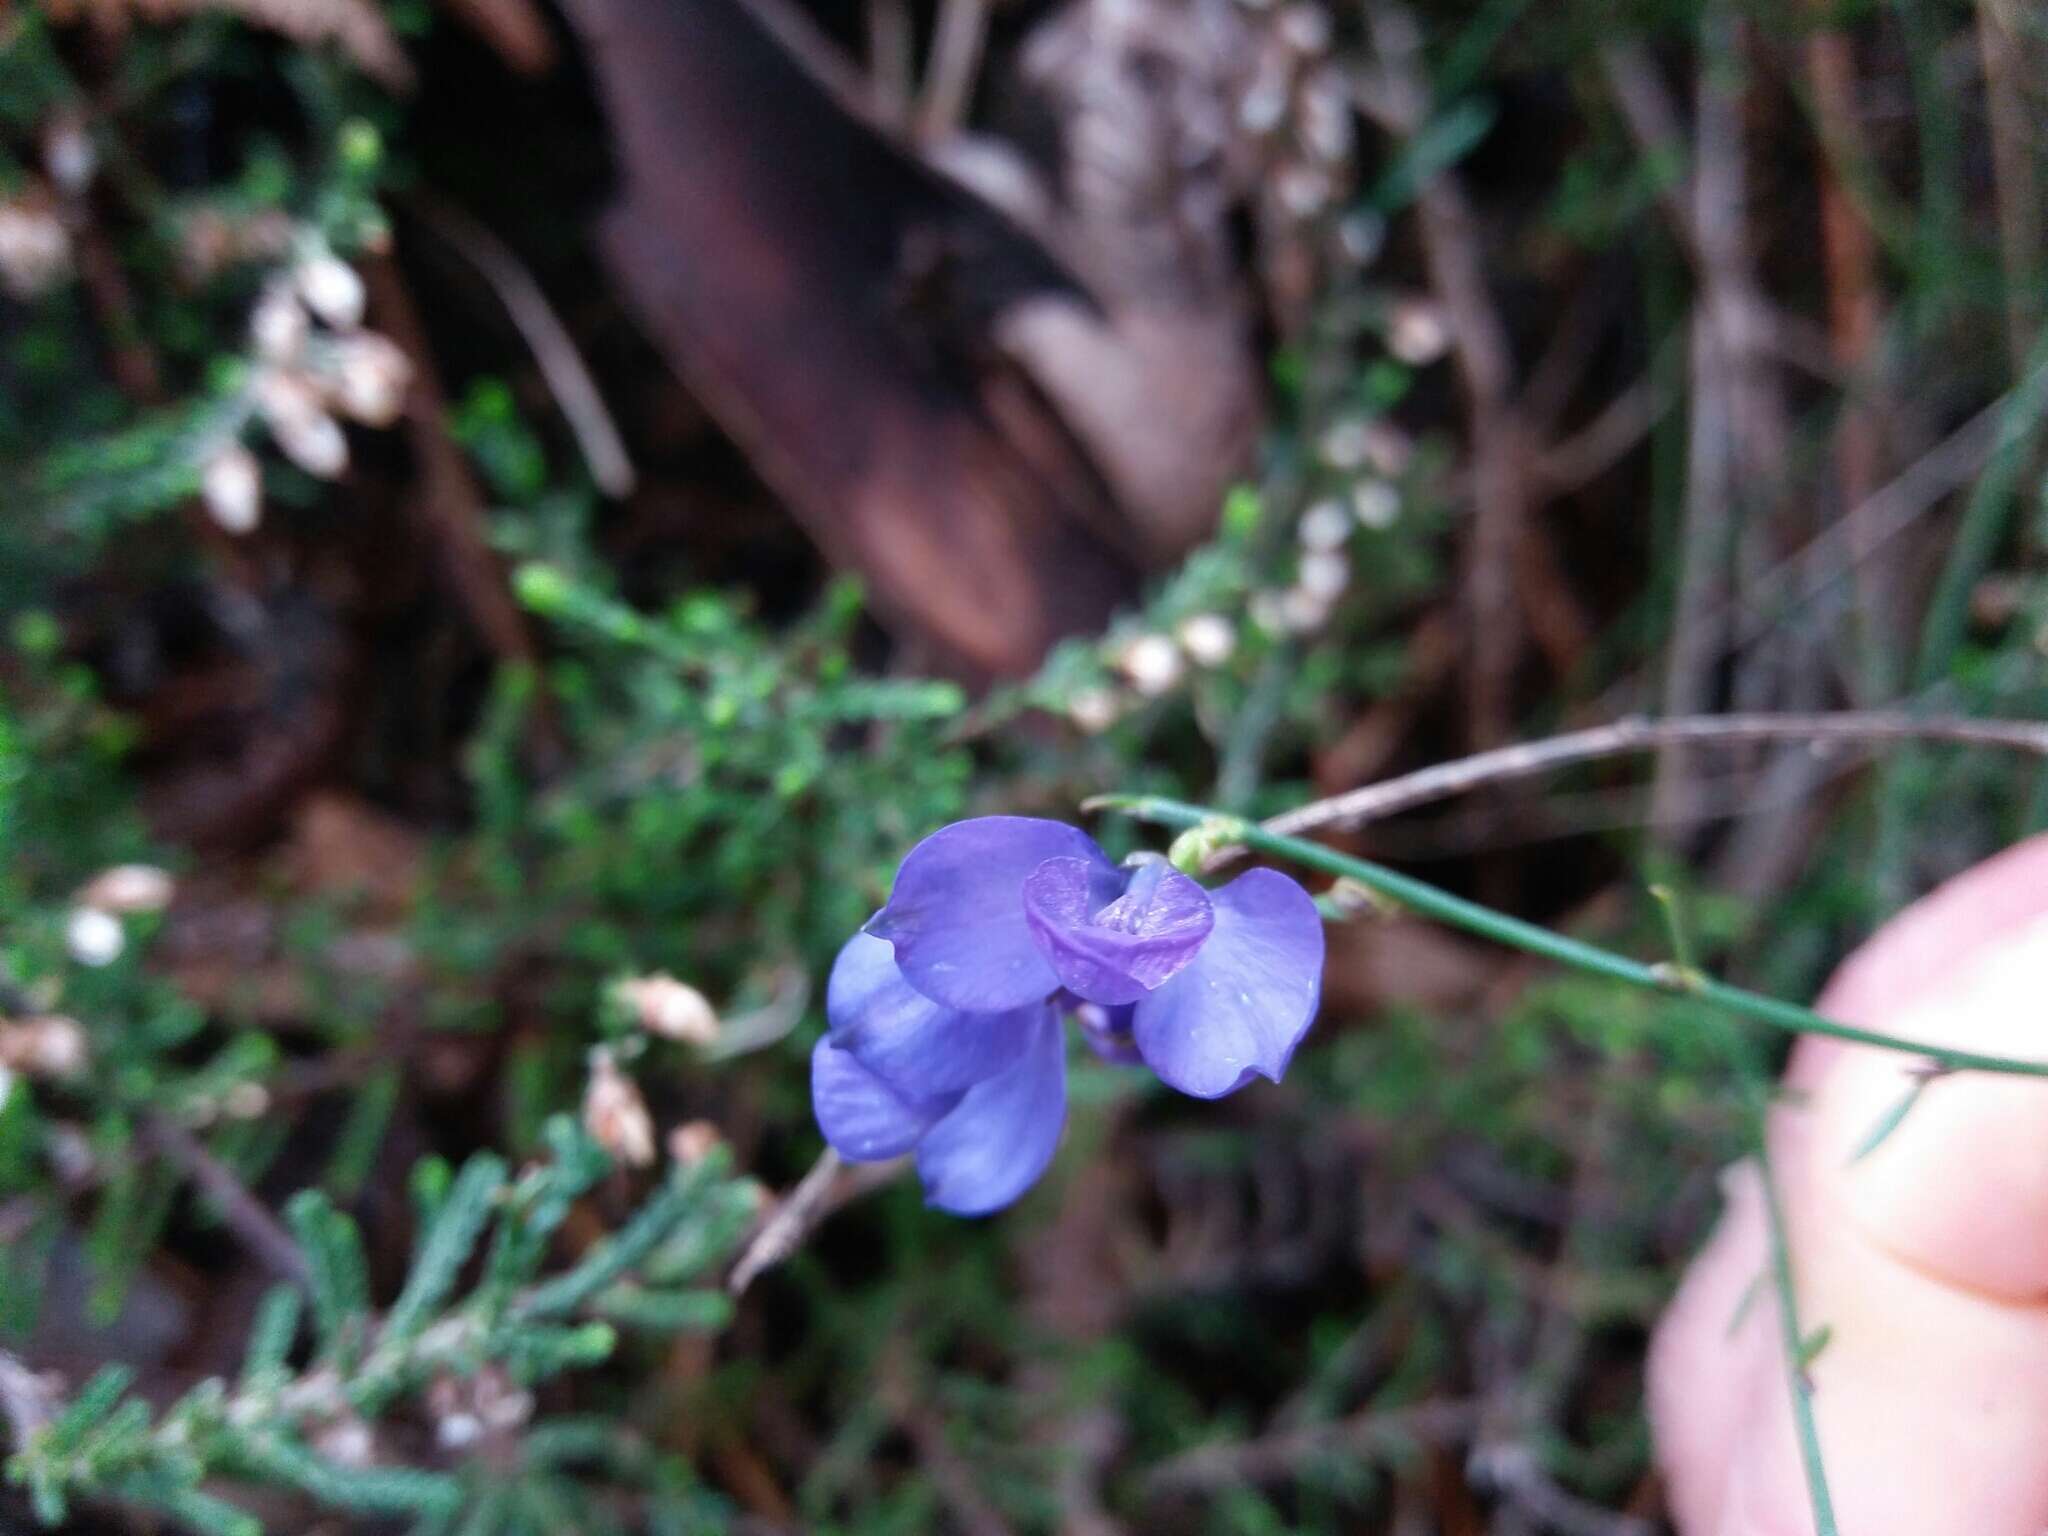 Image of Polygala microphylla L.